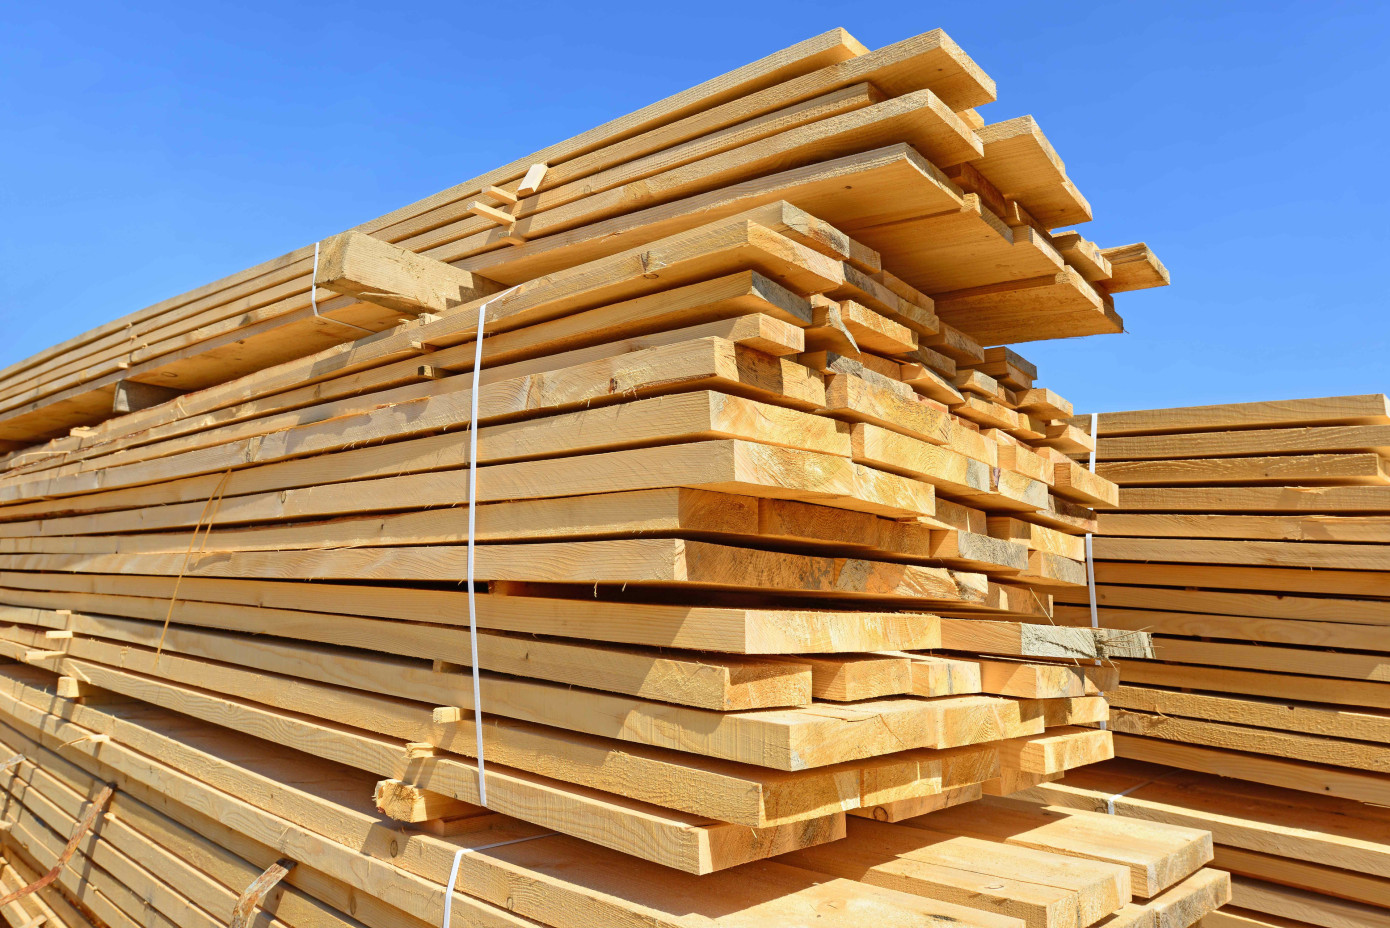 West Fraser Timber to acquire Spray Lake Sawmills in Alberta